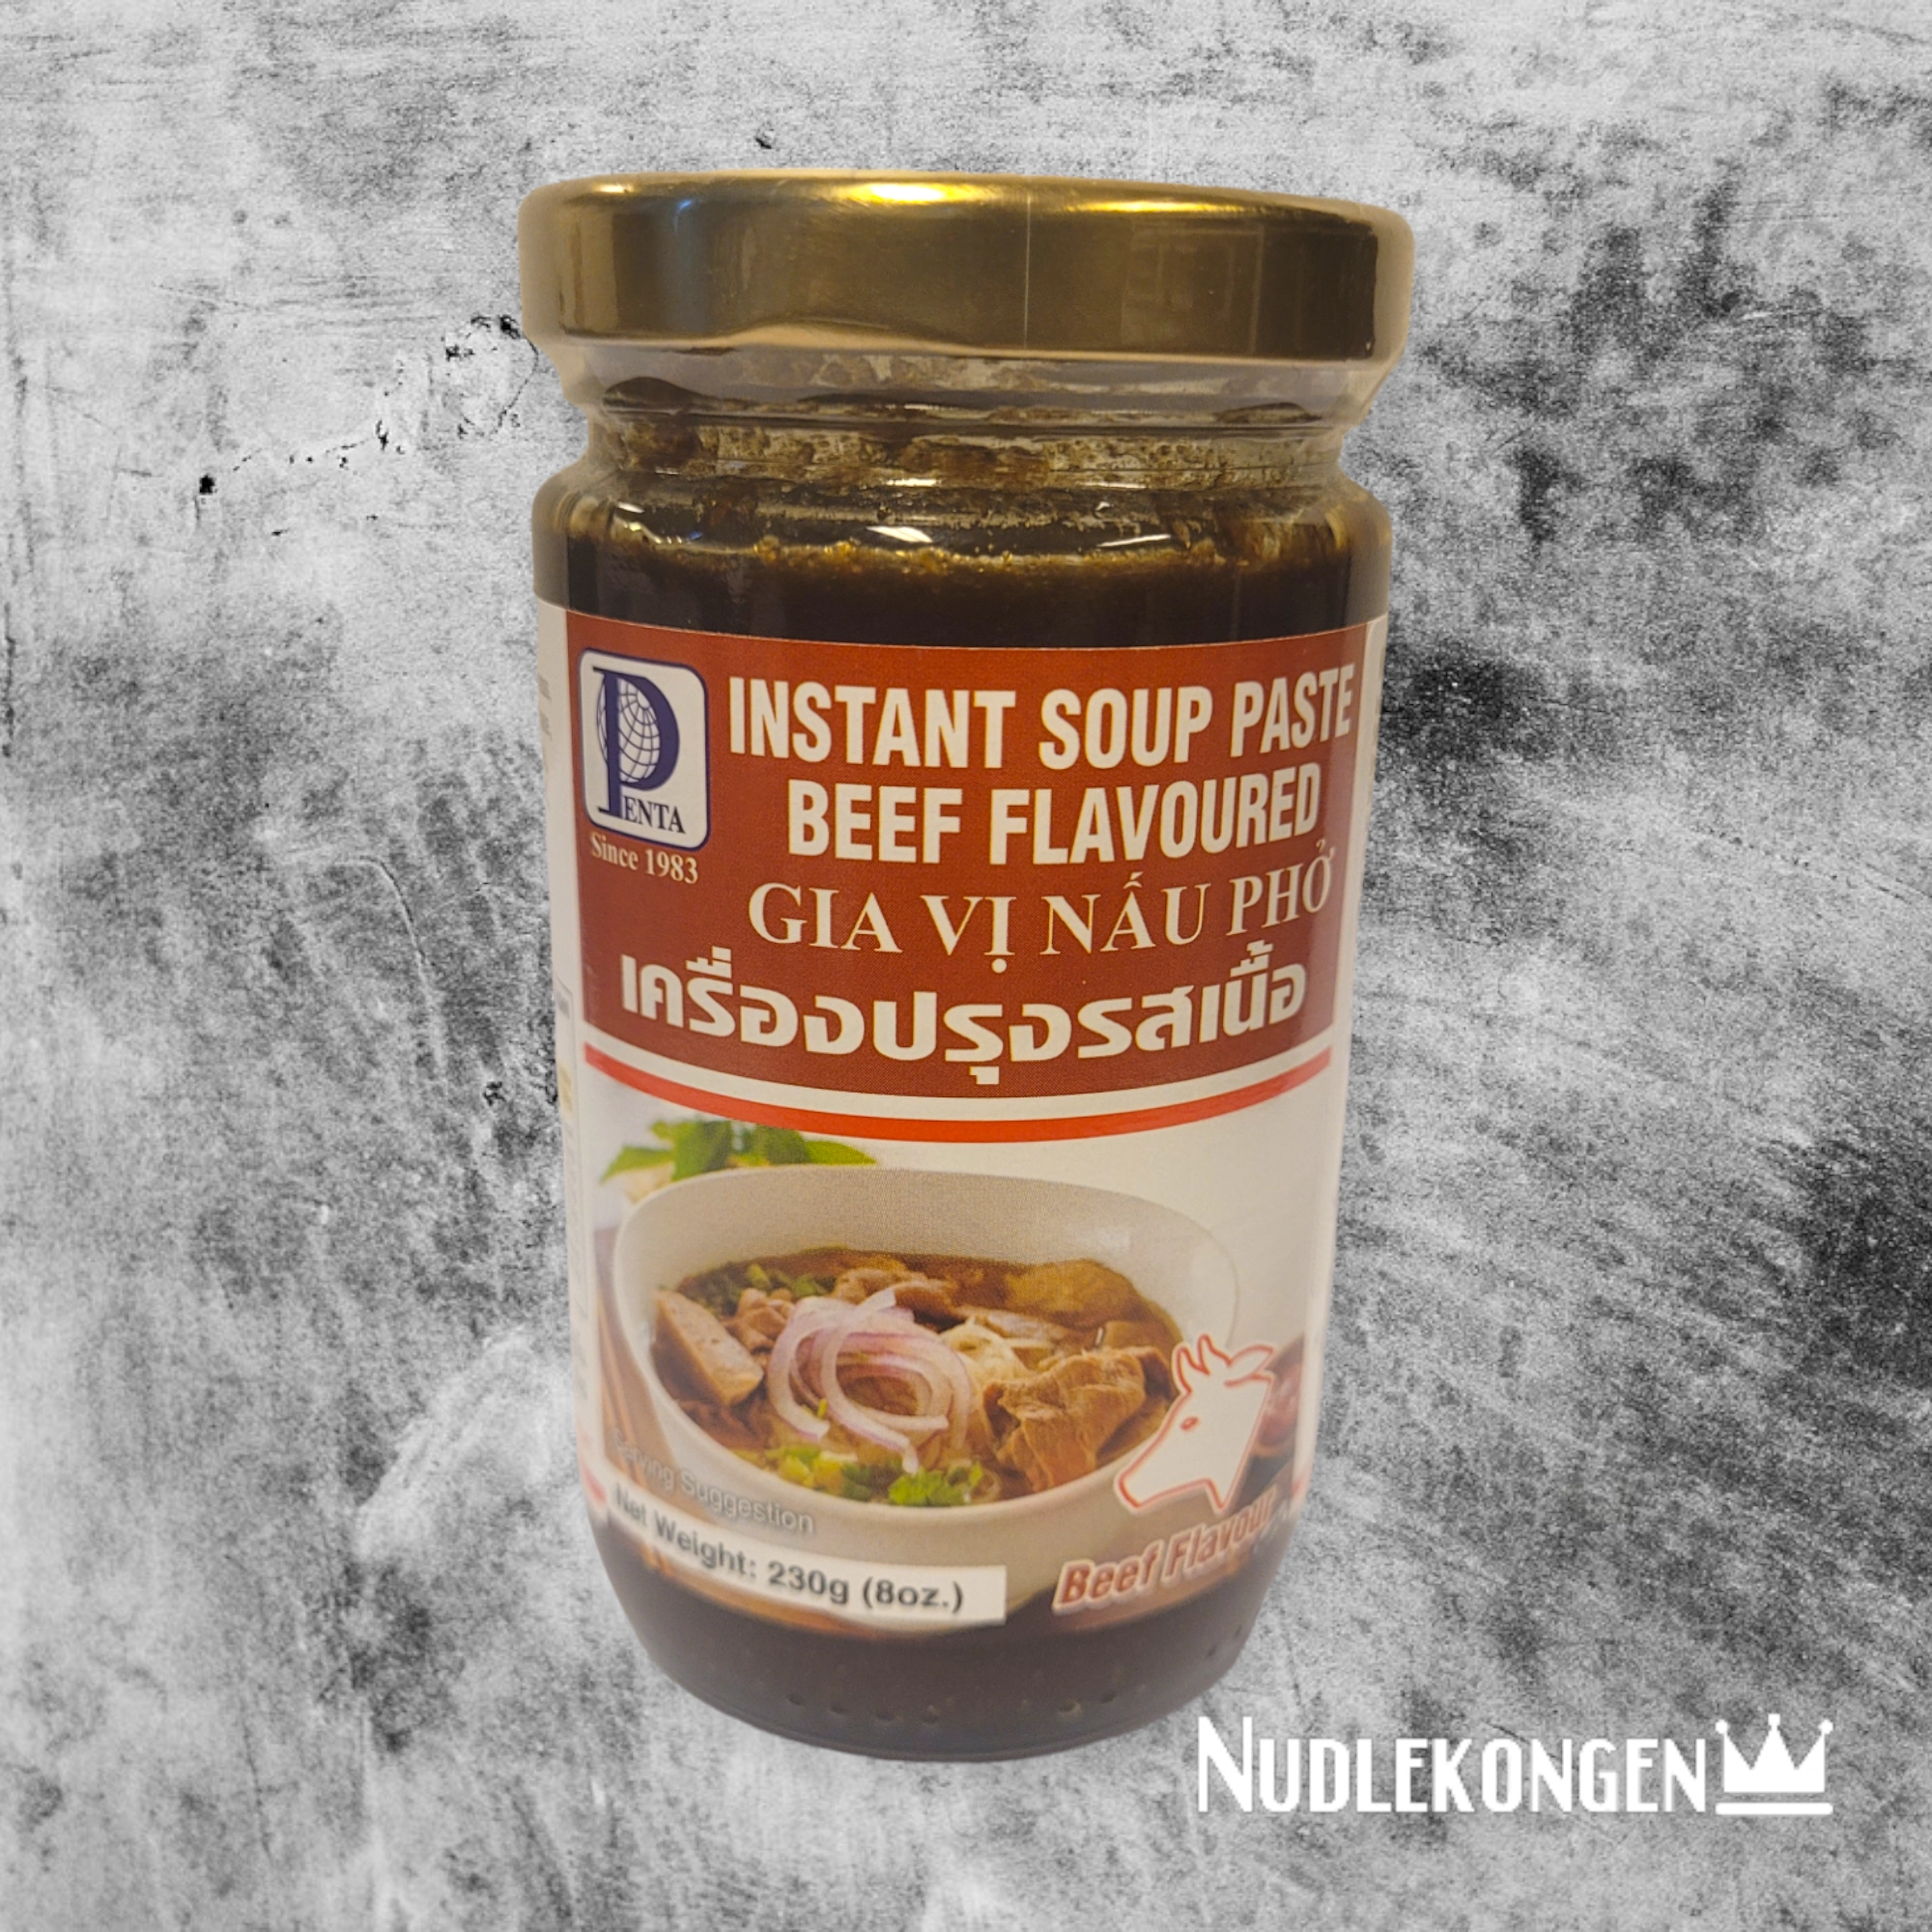 INST. SOUP PASTE BEEF FLAVOURED - PHO